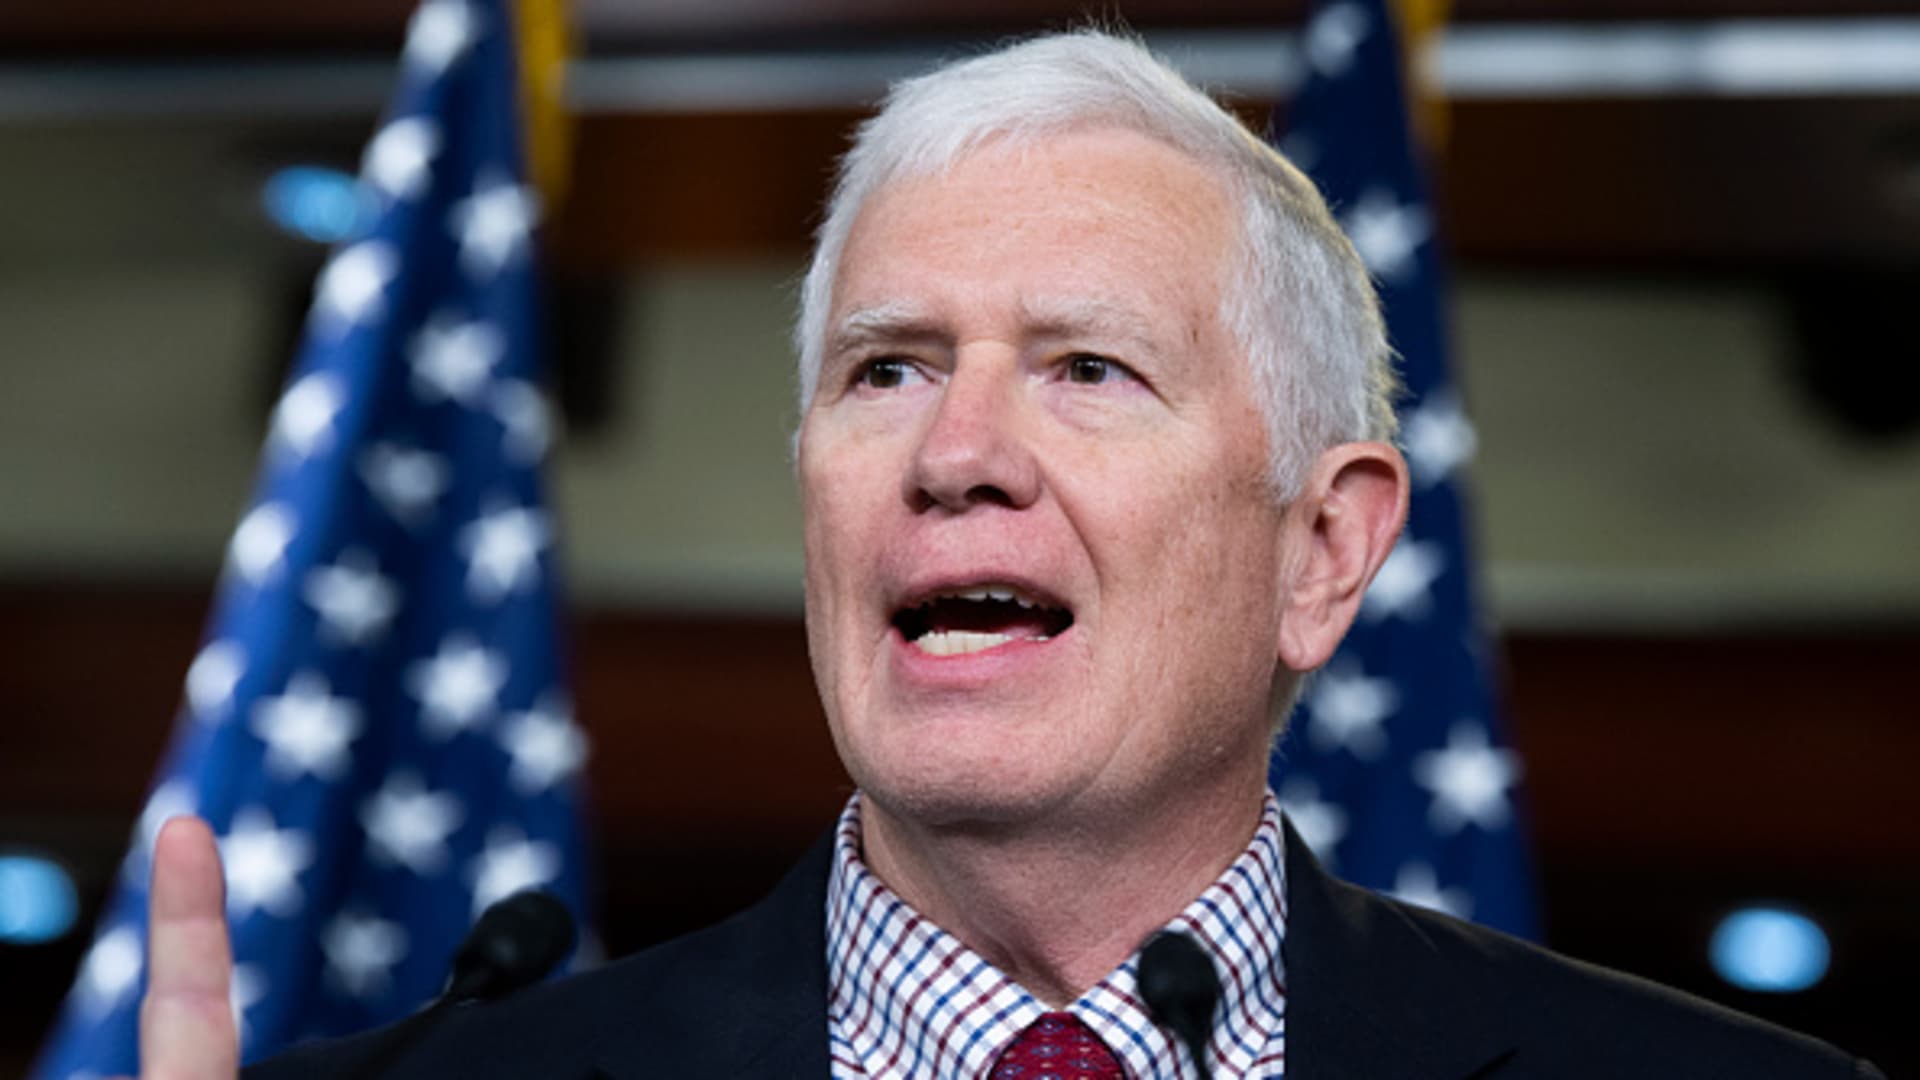 Rep. Mo Brooks says Trump asked him to ‘rescind the 2020 election,’ remove Biden and call special election